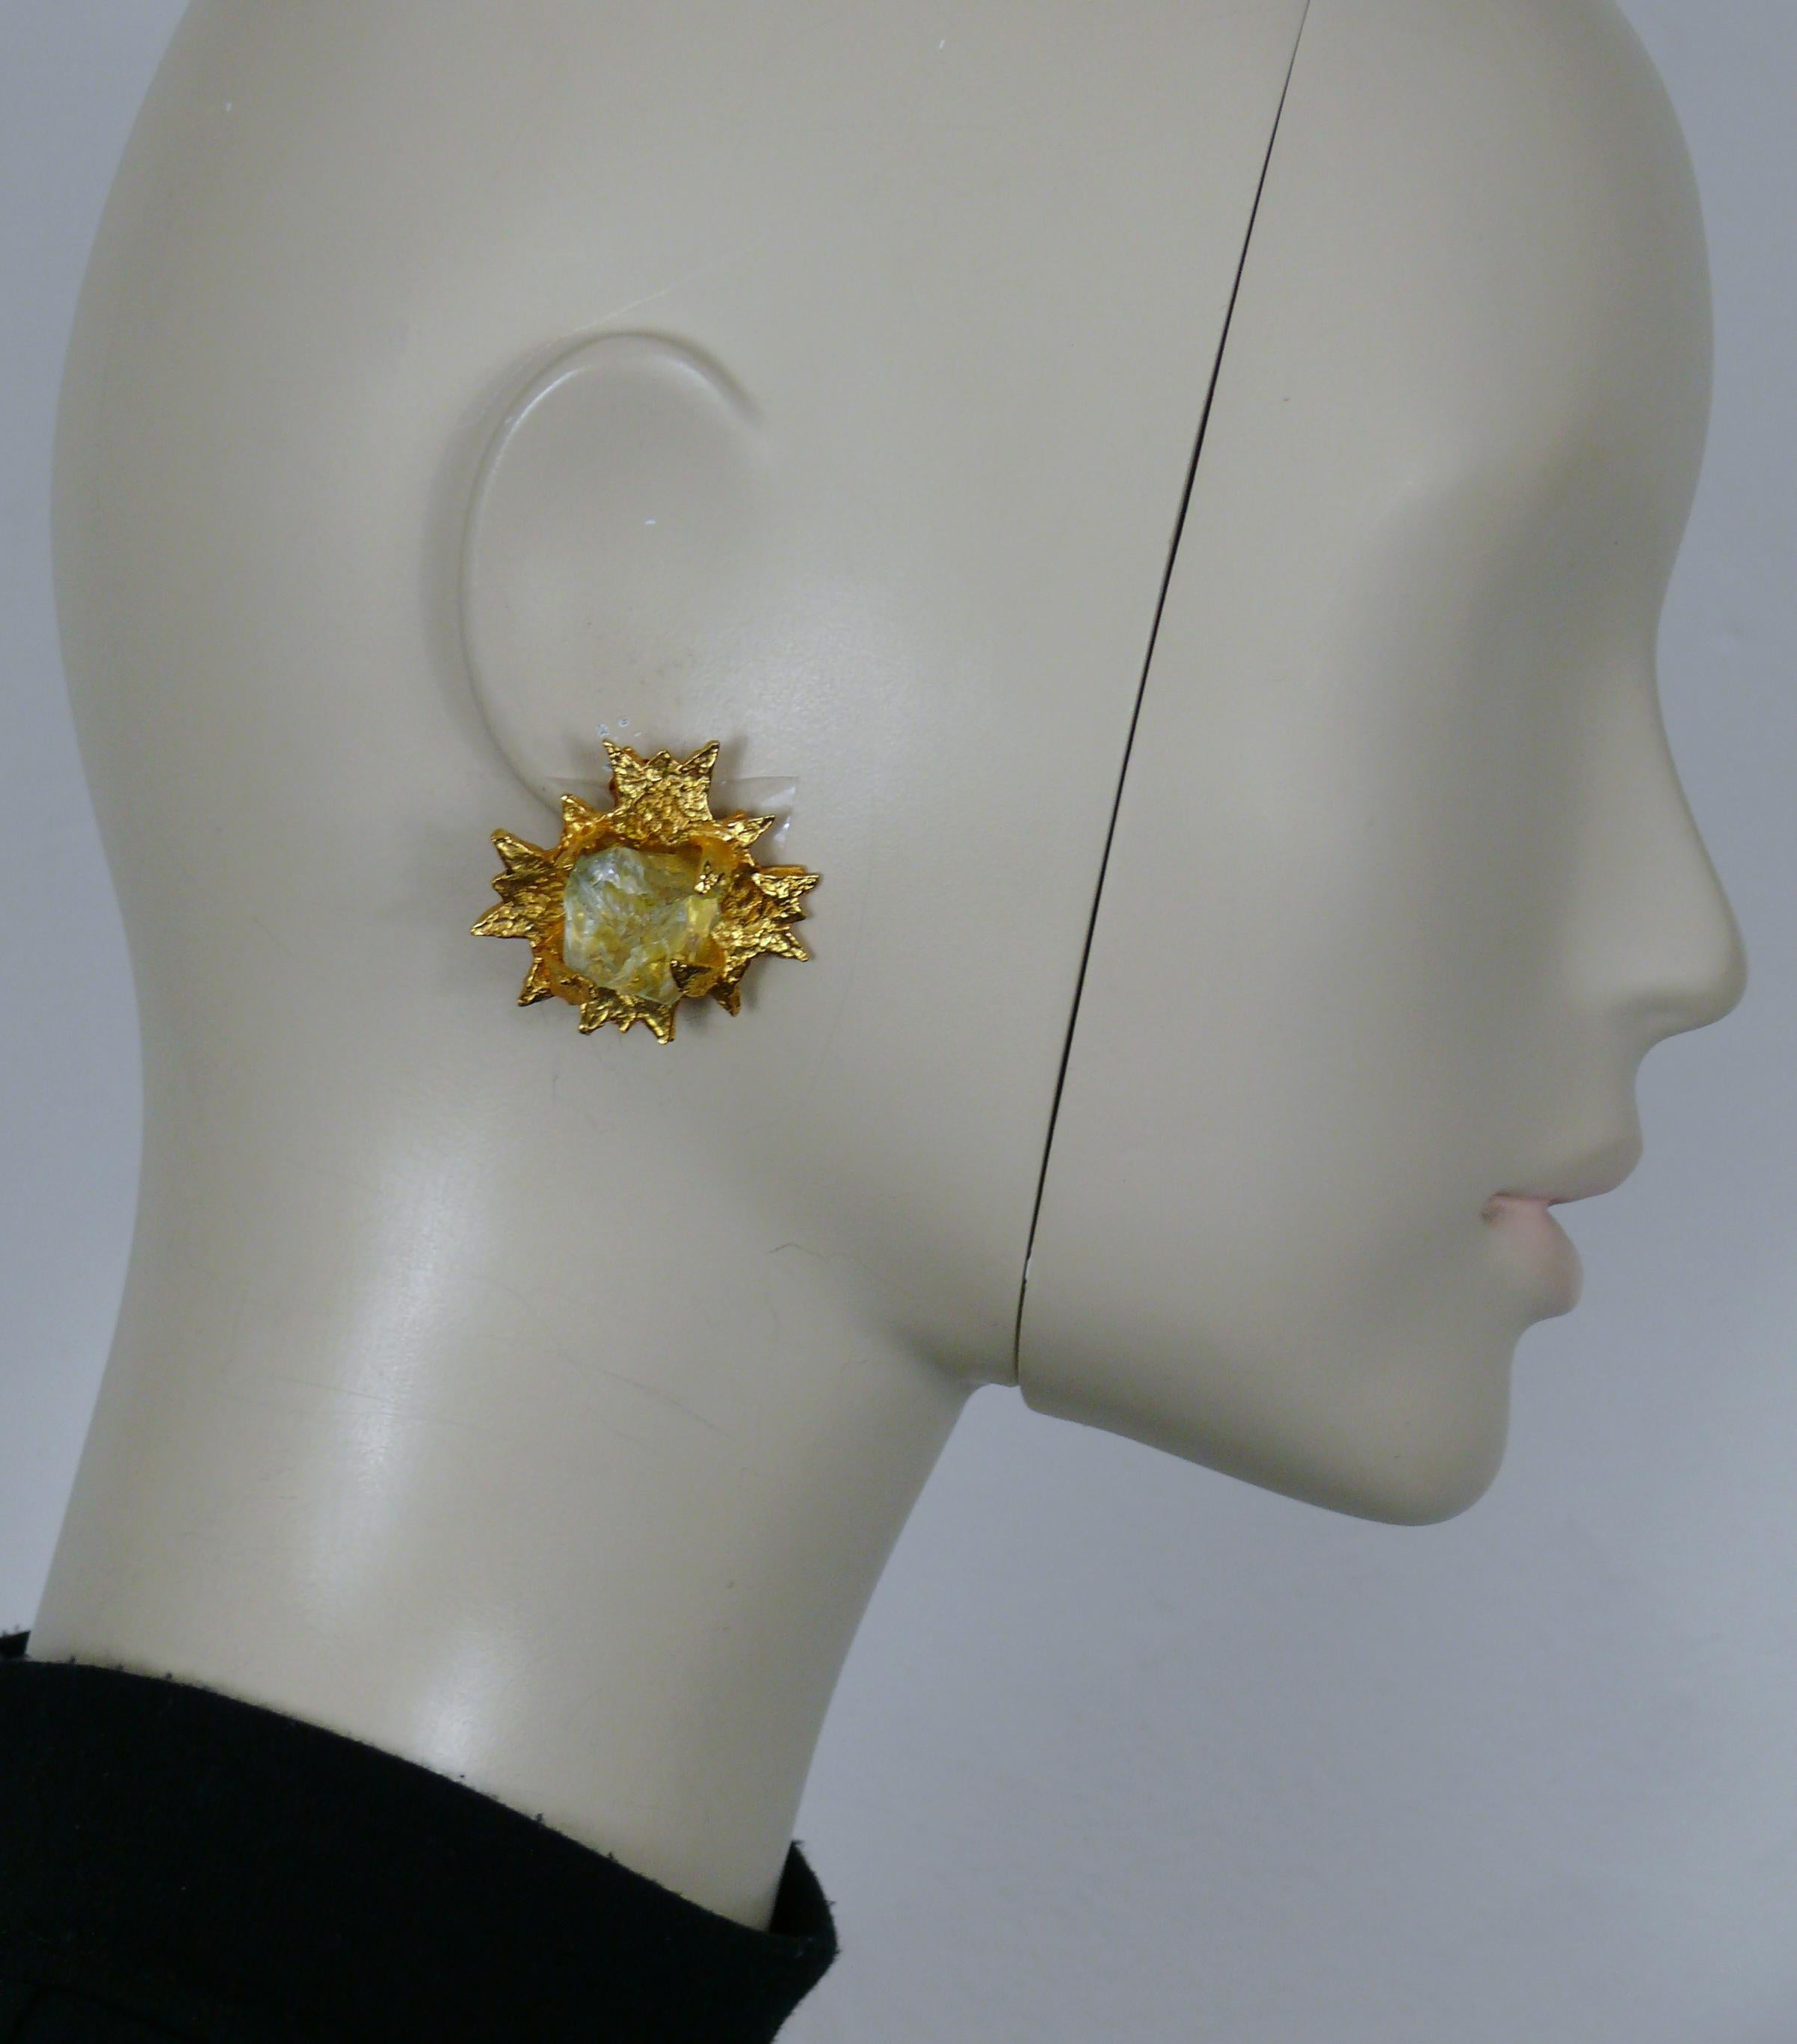 JEAN-LOUIS SCHERRER vintage gold tone textured clip-on earrings featuring sunburst embellished with raw crystal.

Marked SCHERRER Paris.

Indicative measurements : height approx. 3.4 cm (1.34 inches) / width approx. 3.4 cm (1.34 inches).

Weight per